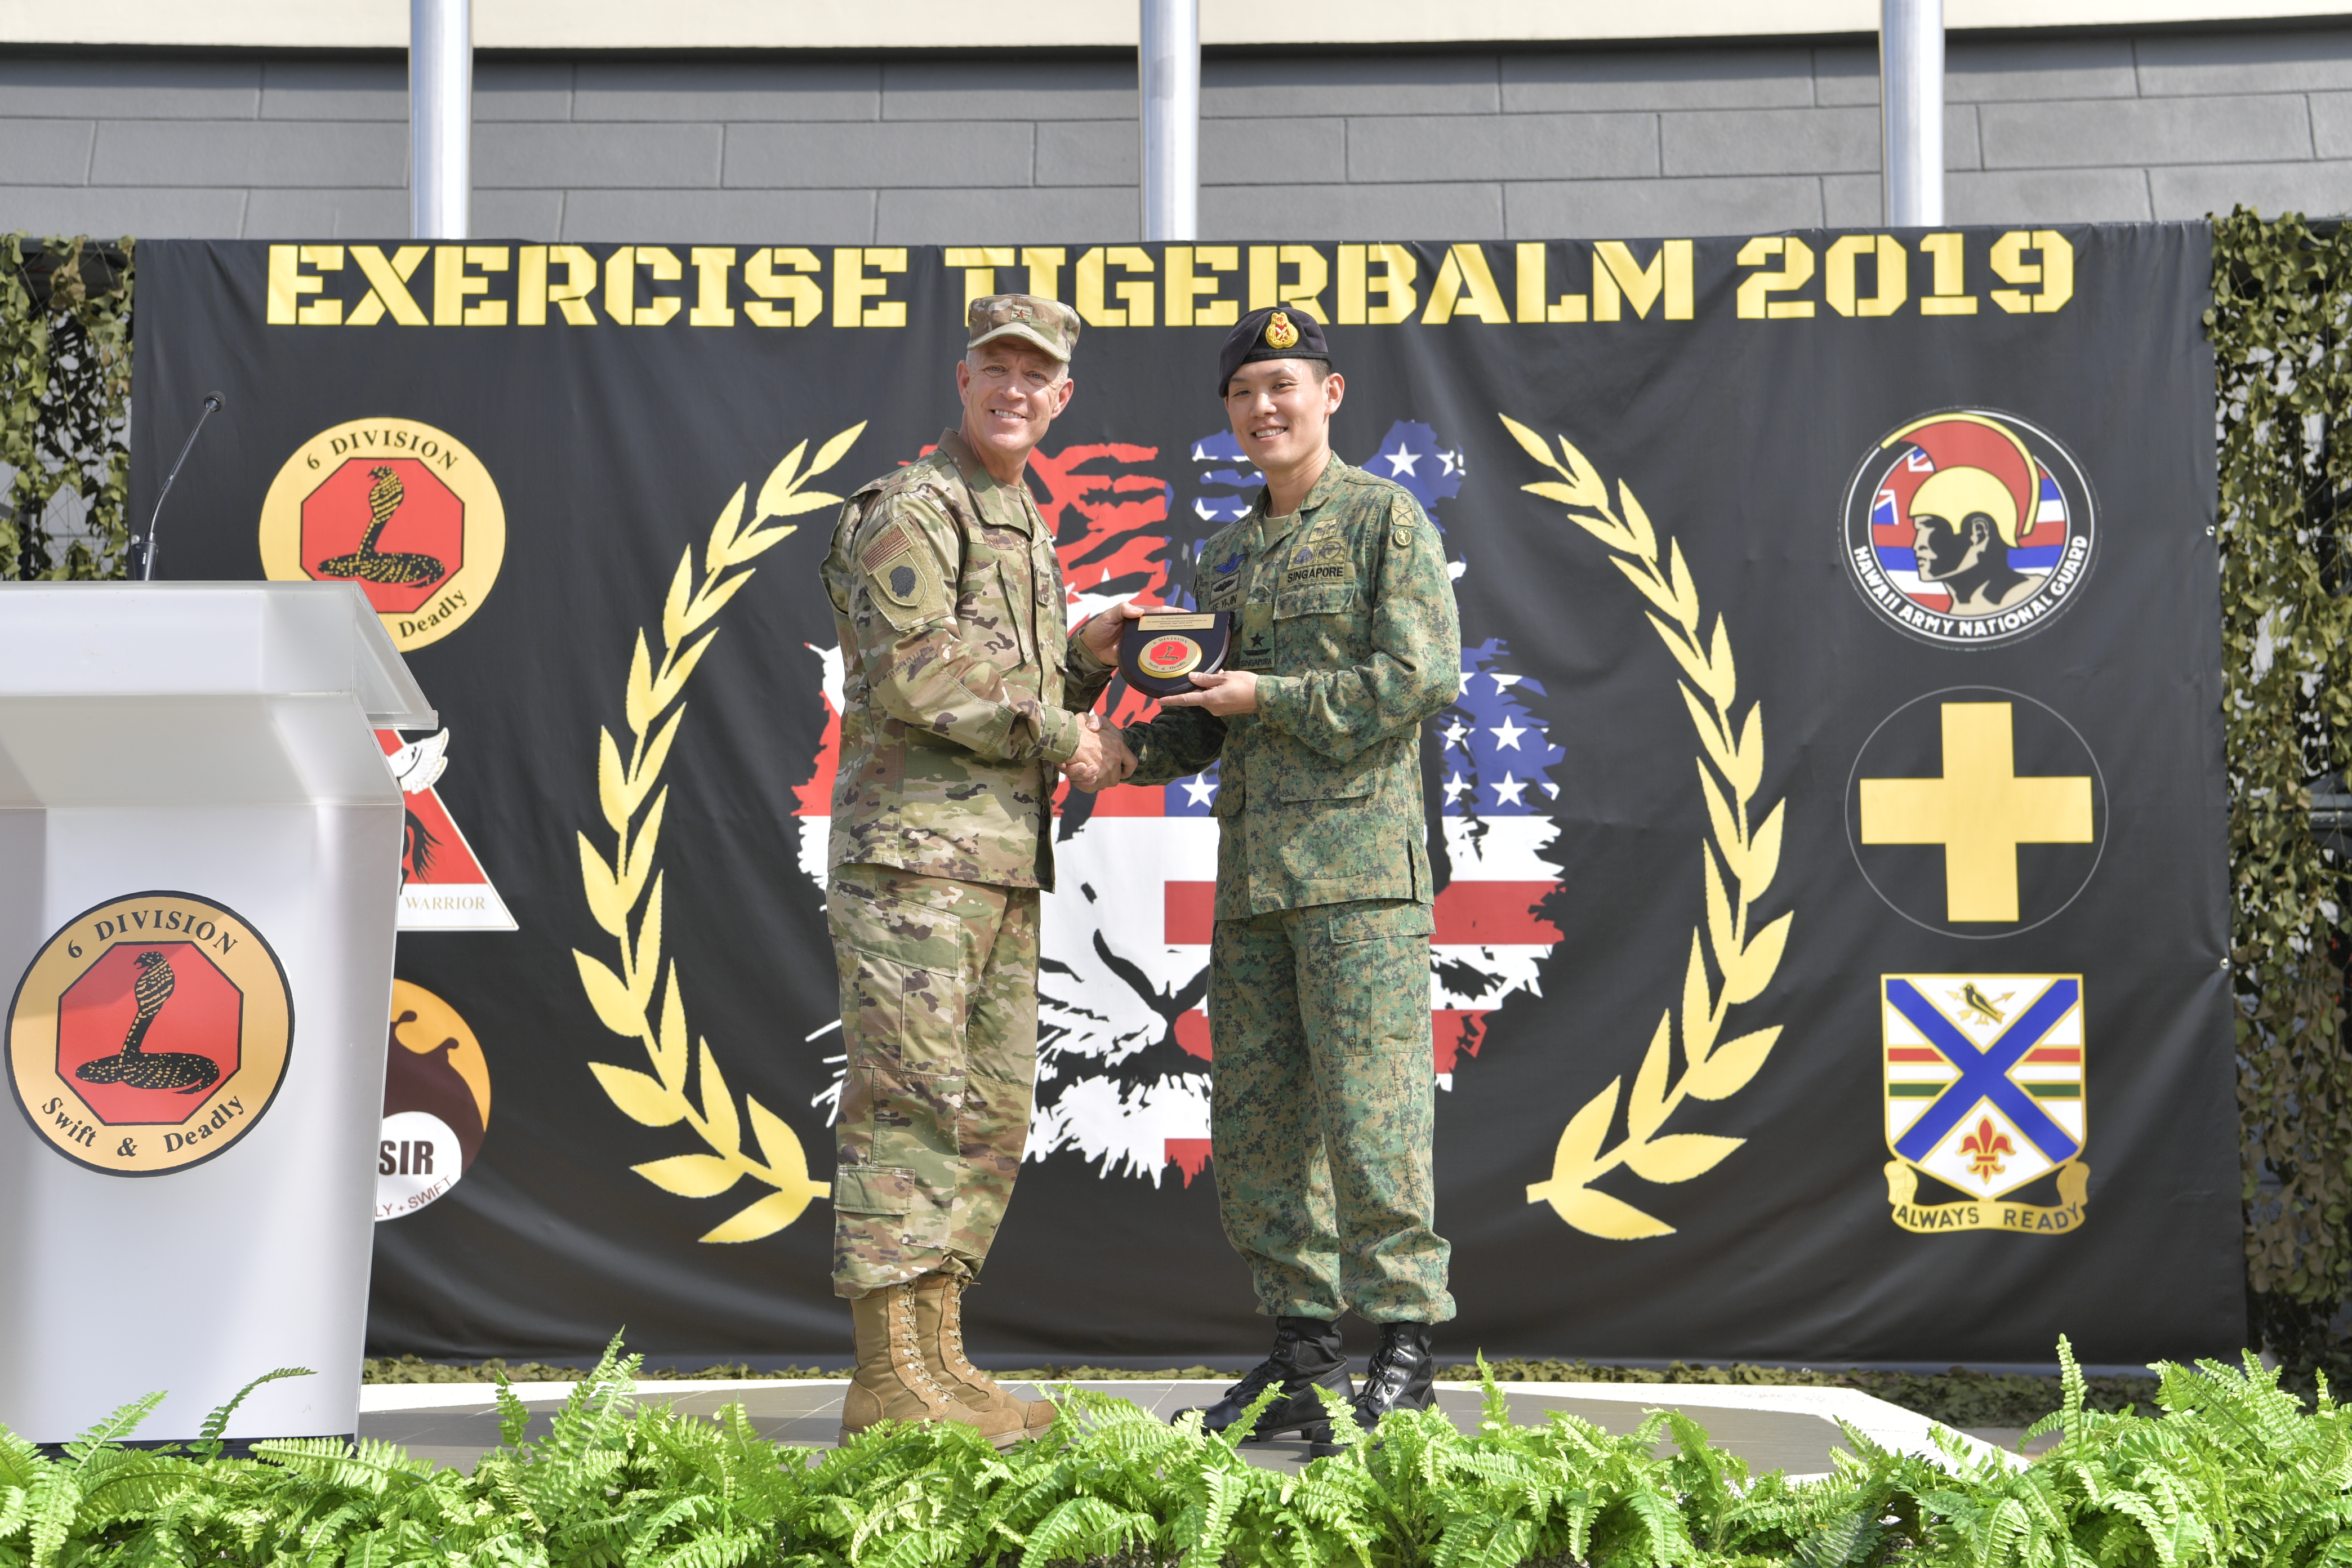 The Adjutant General Illinois National Guard (Brigadier-General) BG Richard R.Neely and Commander 6th Singapore Division BG Lee Yi-Jin at the closing ceremony of Exercise Tiger Balm 2019.